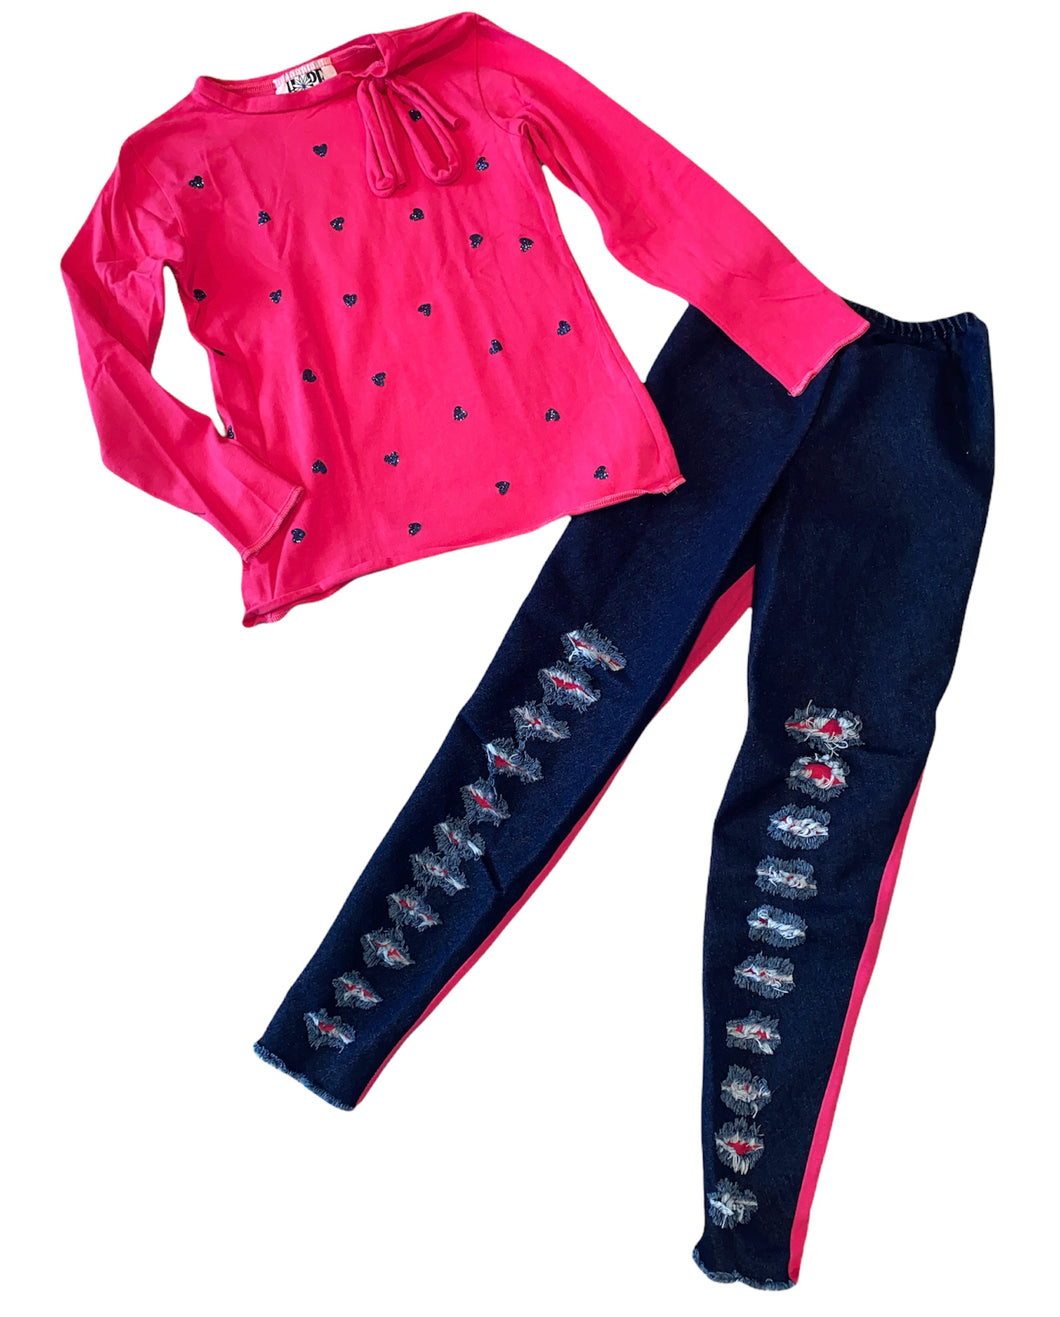 Hope Jeans girls 2pc glitter hearts and ripped jeggings outfit set 10